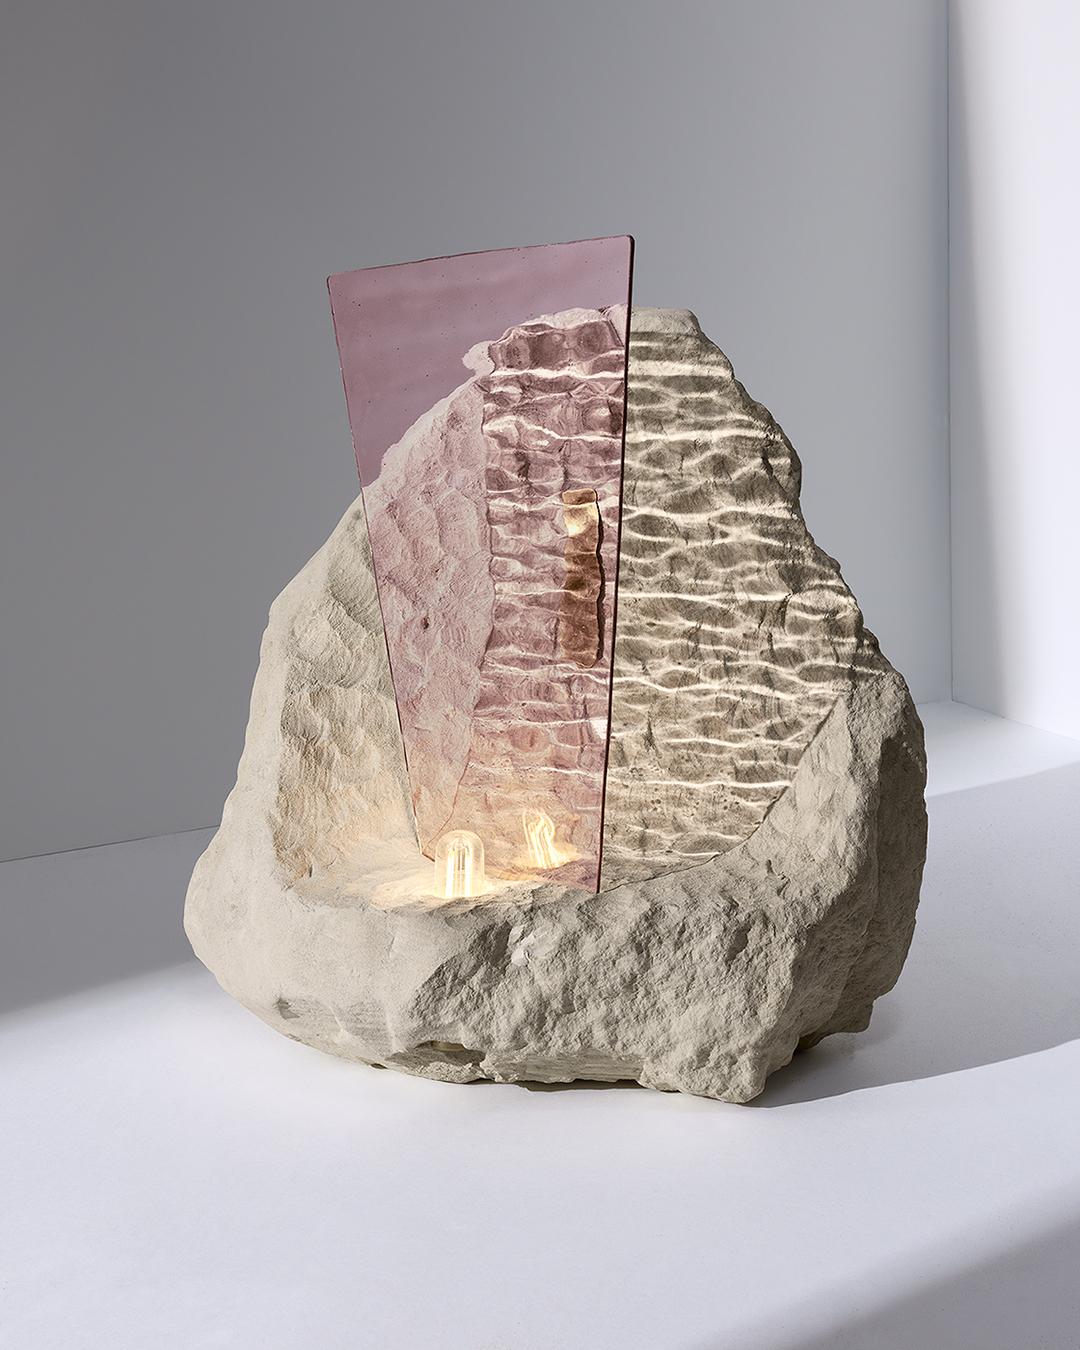 Tinharé by Marie Jeunet
Dimensions: Base: Width 15.74 inches, height 16.53 inches, depth 13.77 inches
 Glass height 11.81 inches 
 Total height 18.50 inches
Materials: Translucent wavy rose glass, Tufa stone and brass finishes

Off the coast of